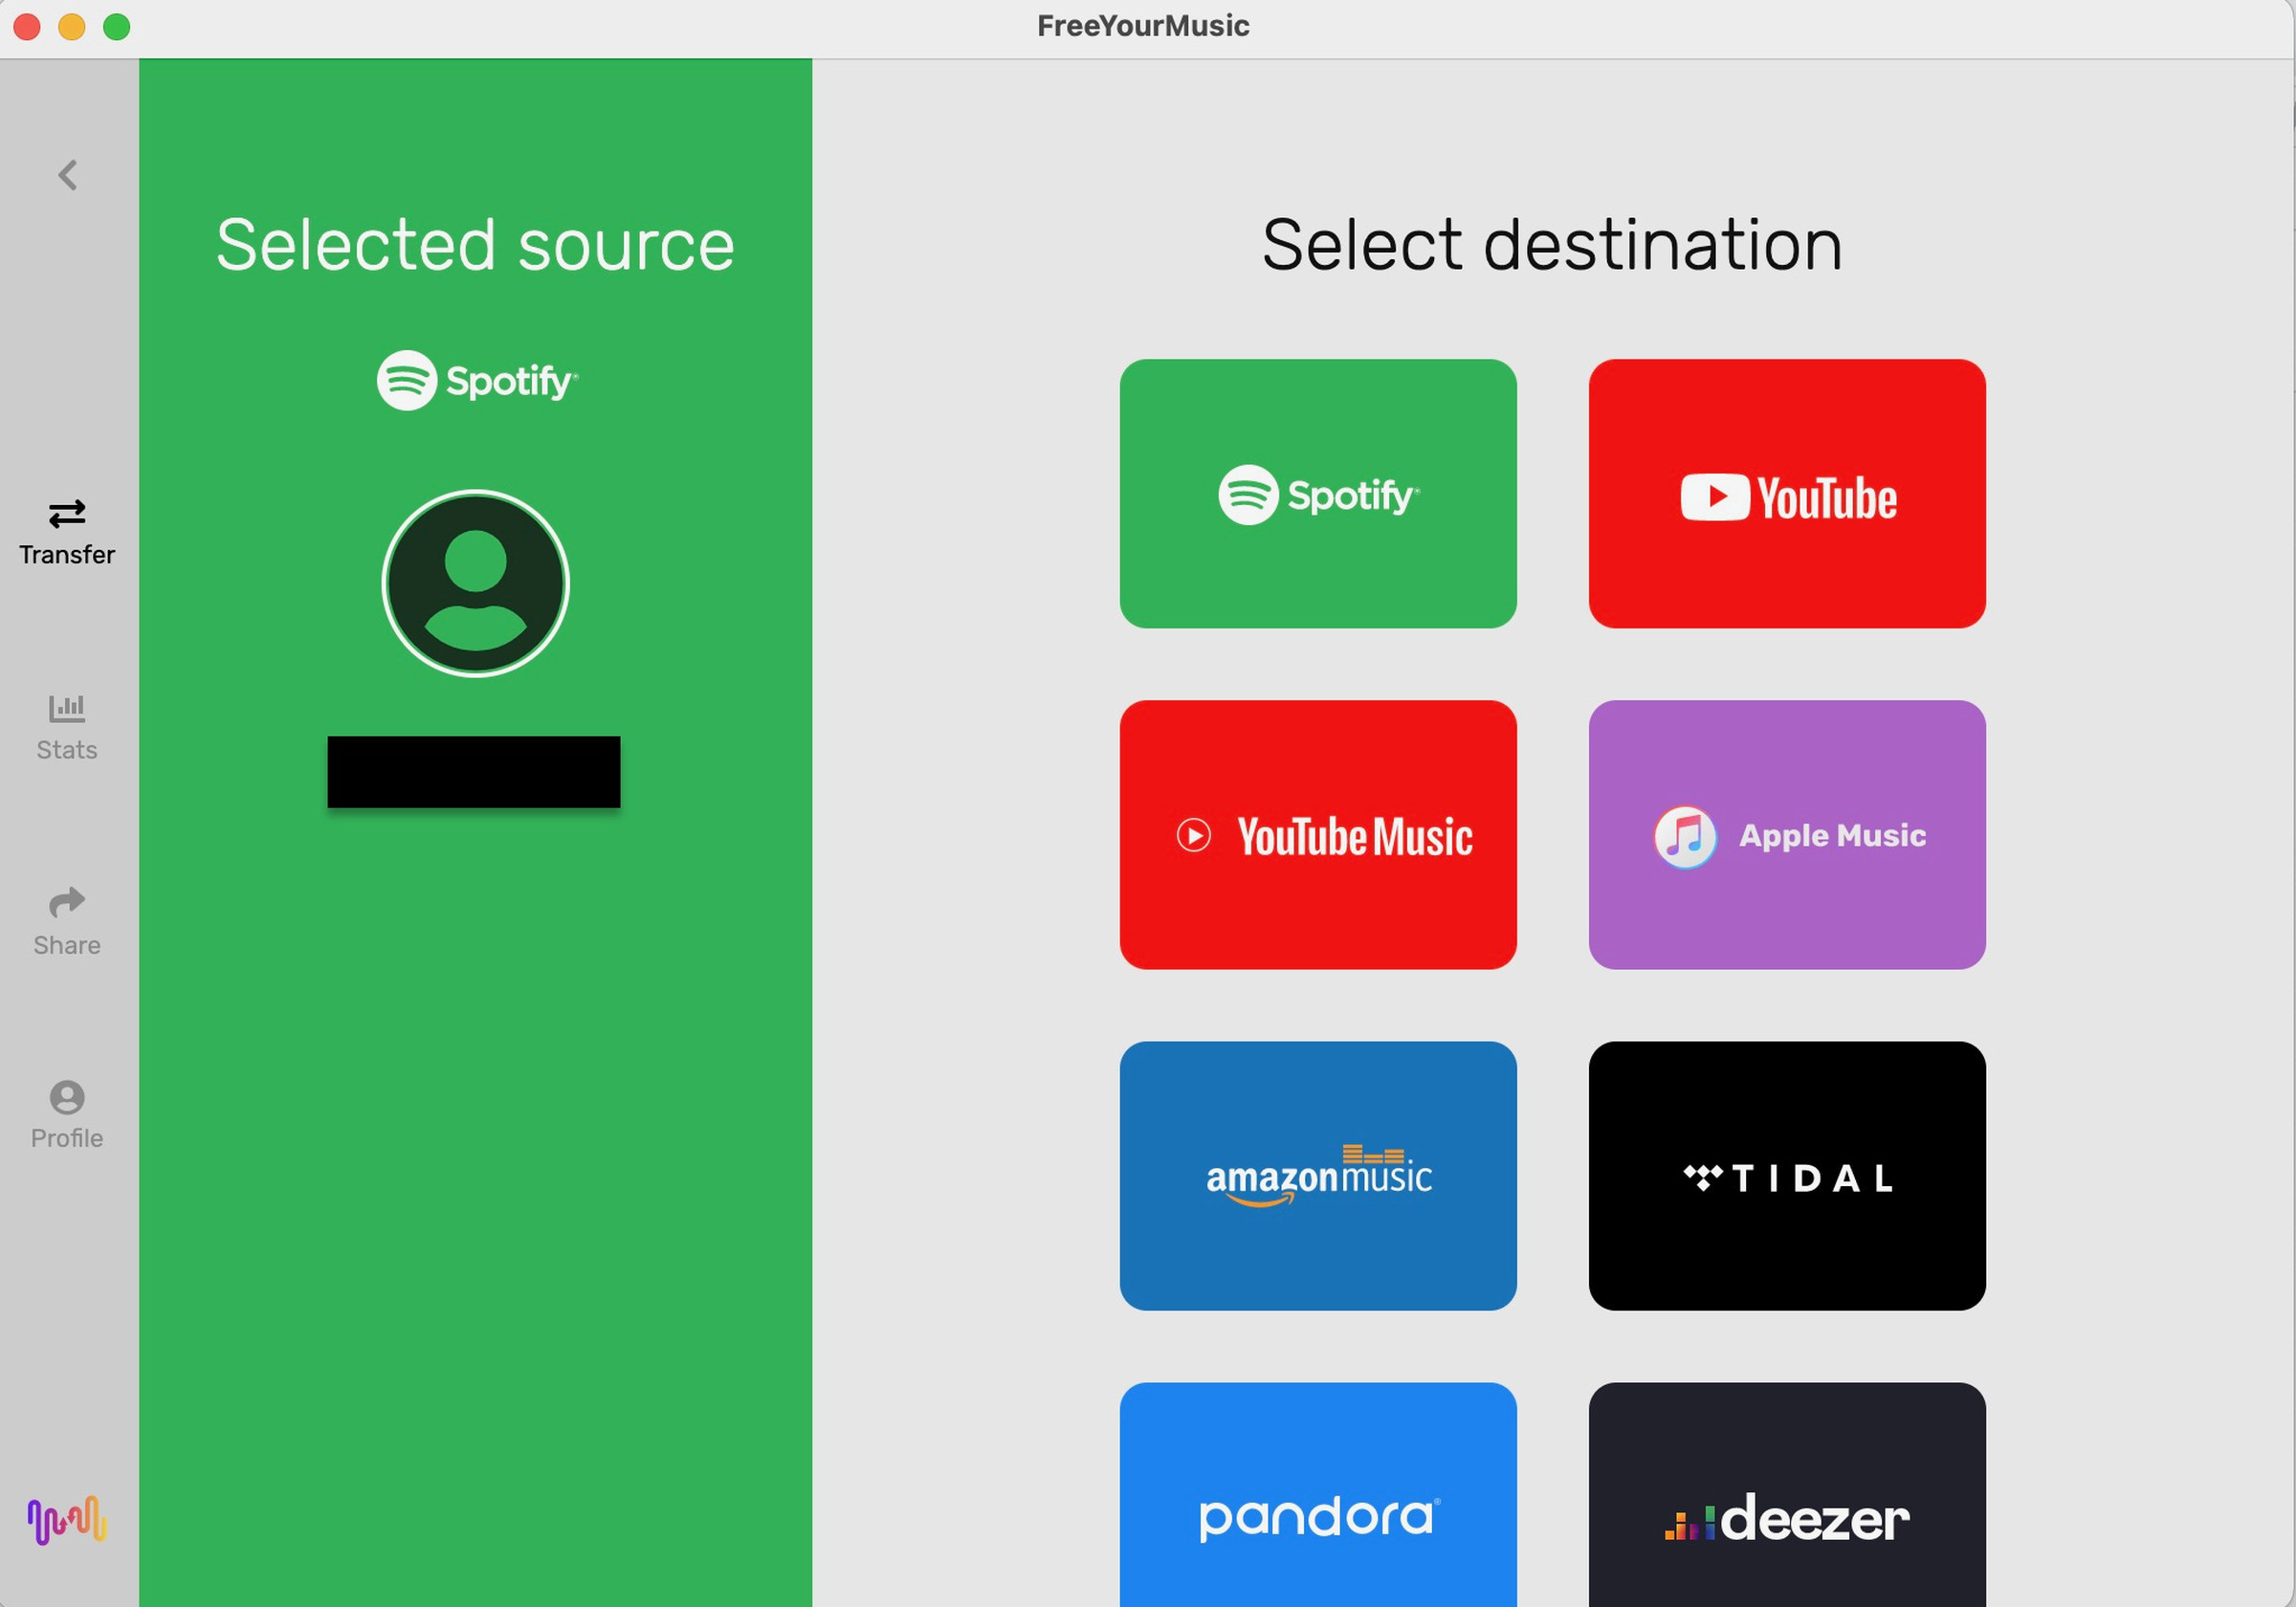 The source is now listed on the left while you choose your destination.